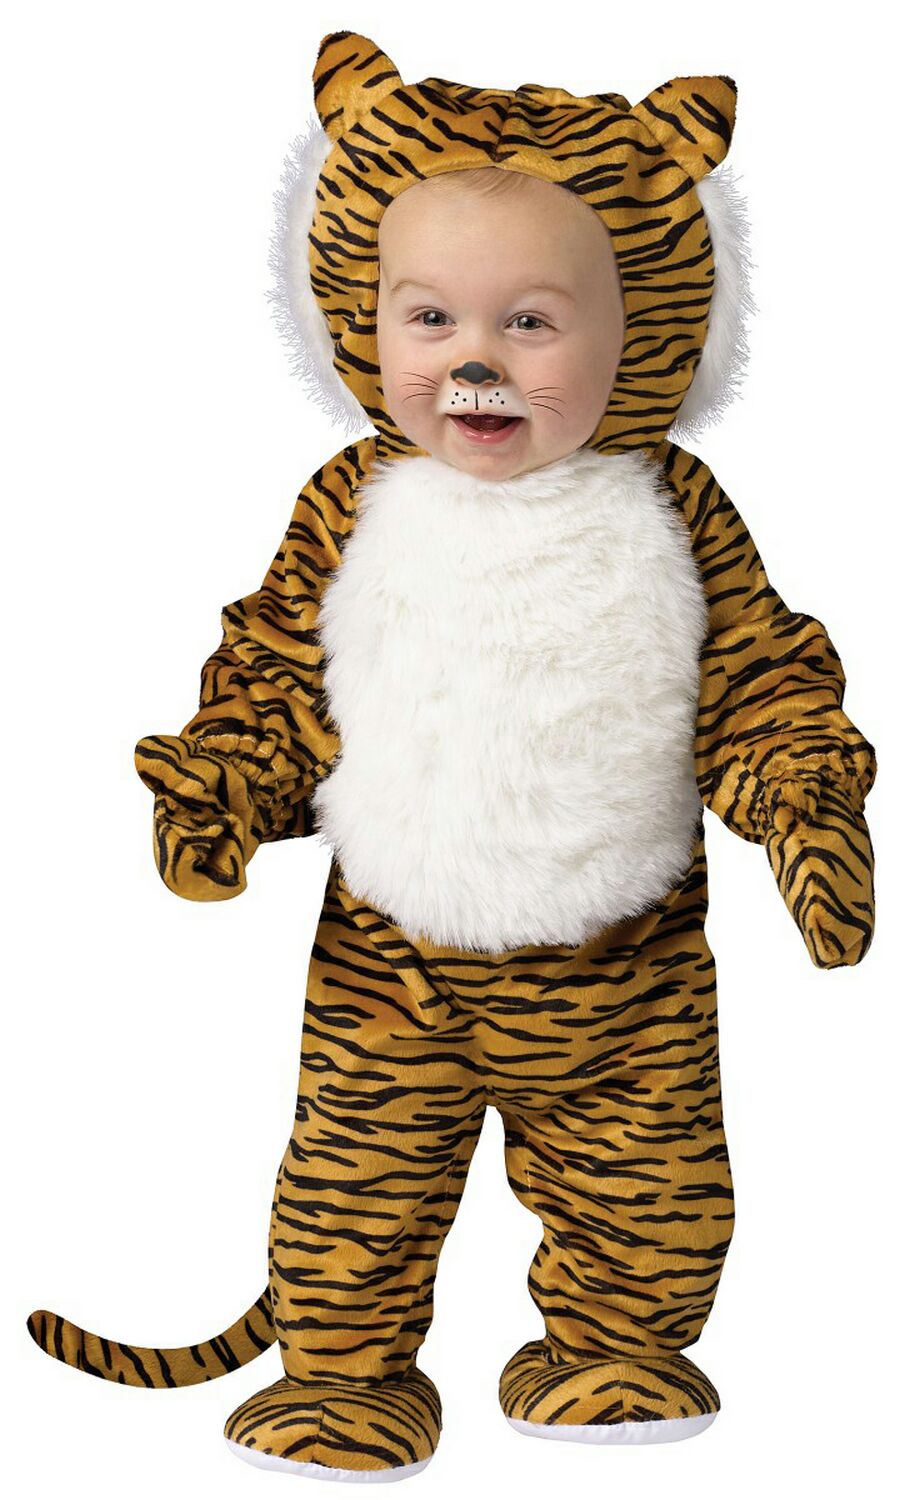 cuddly-tiger-costume 5 Most Wanted Halloween Beanie Babies Costumes